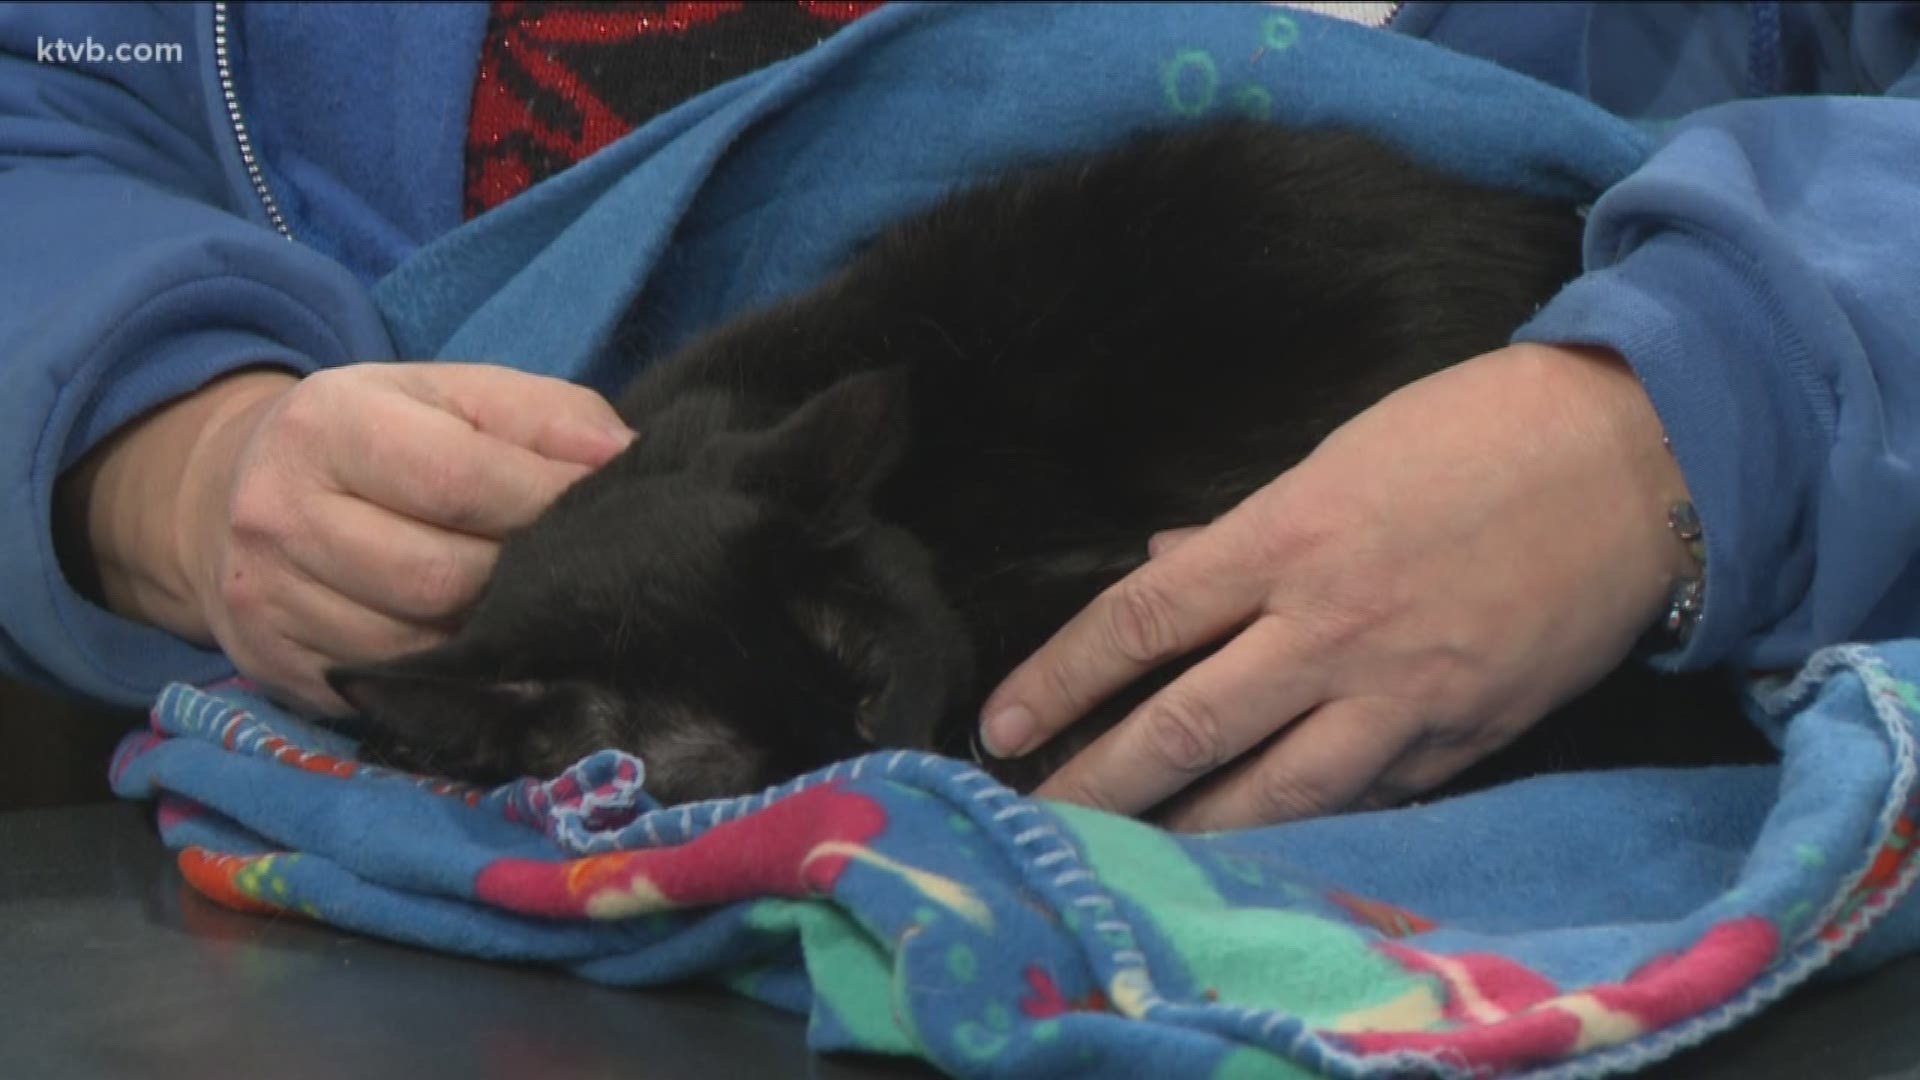 The Idaho Humane Society recommends this four-and-a-half-year-old cat lives in a home with no other pets.